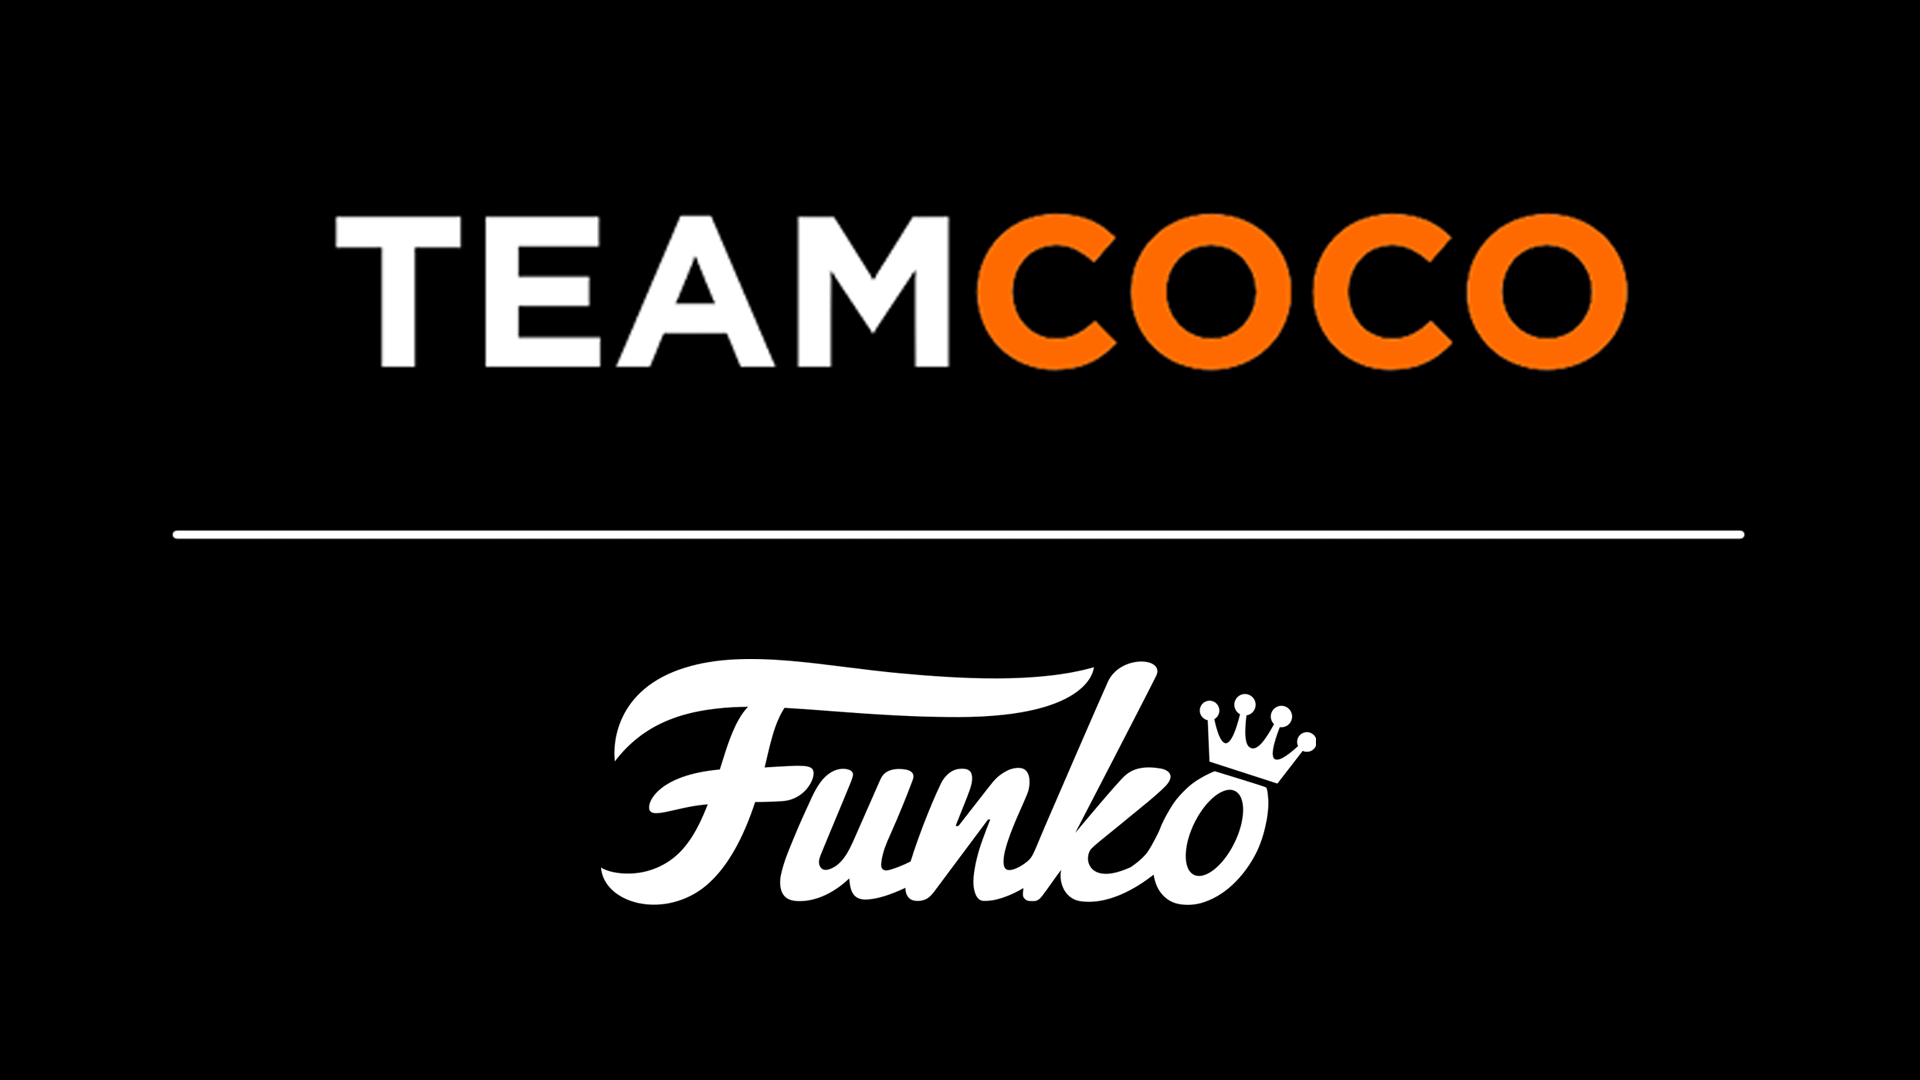 Conan Funko: 2020 Line-Up To Be Revealed on Dec 7